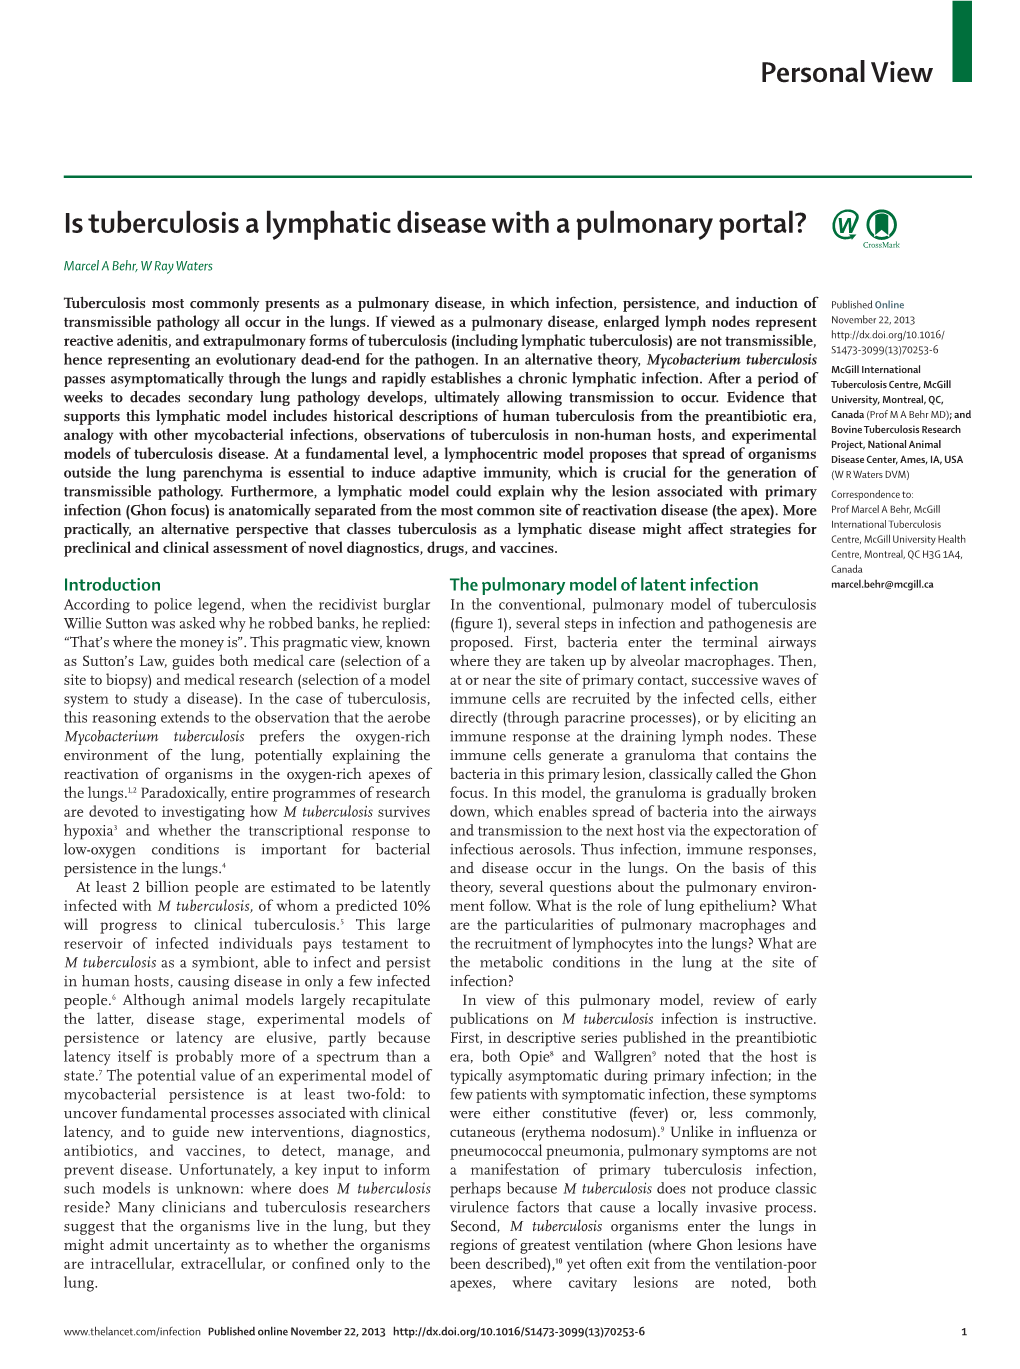 Is Tuberculosis a Lymphatic Disease with a Pulmonary Portal?